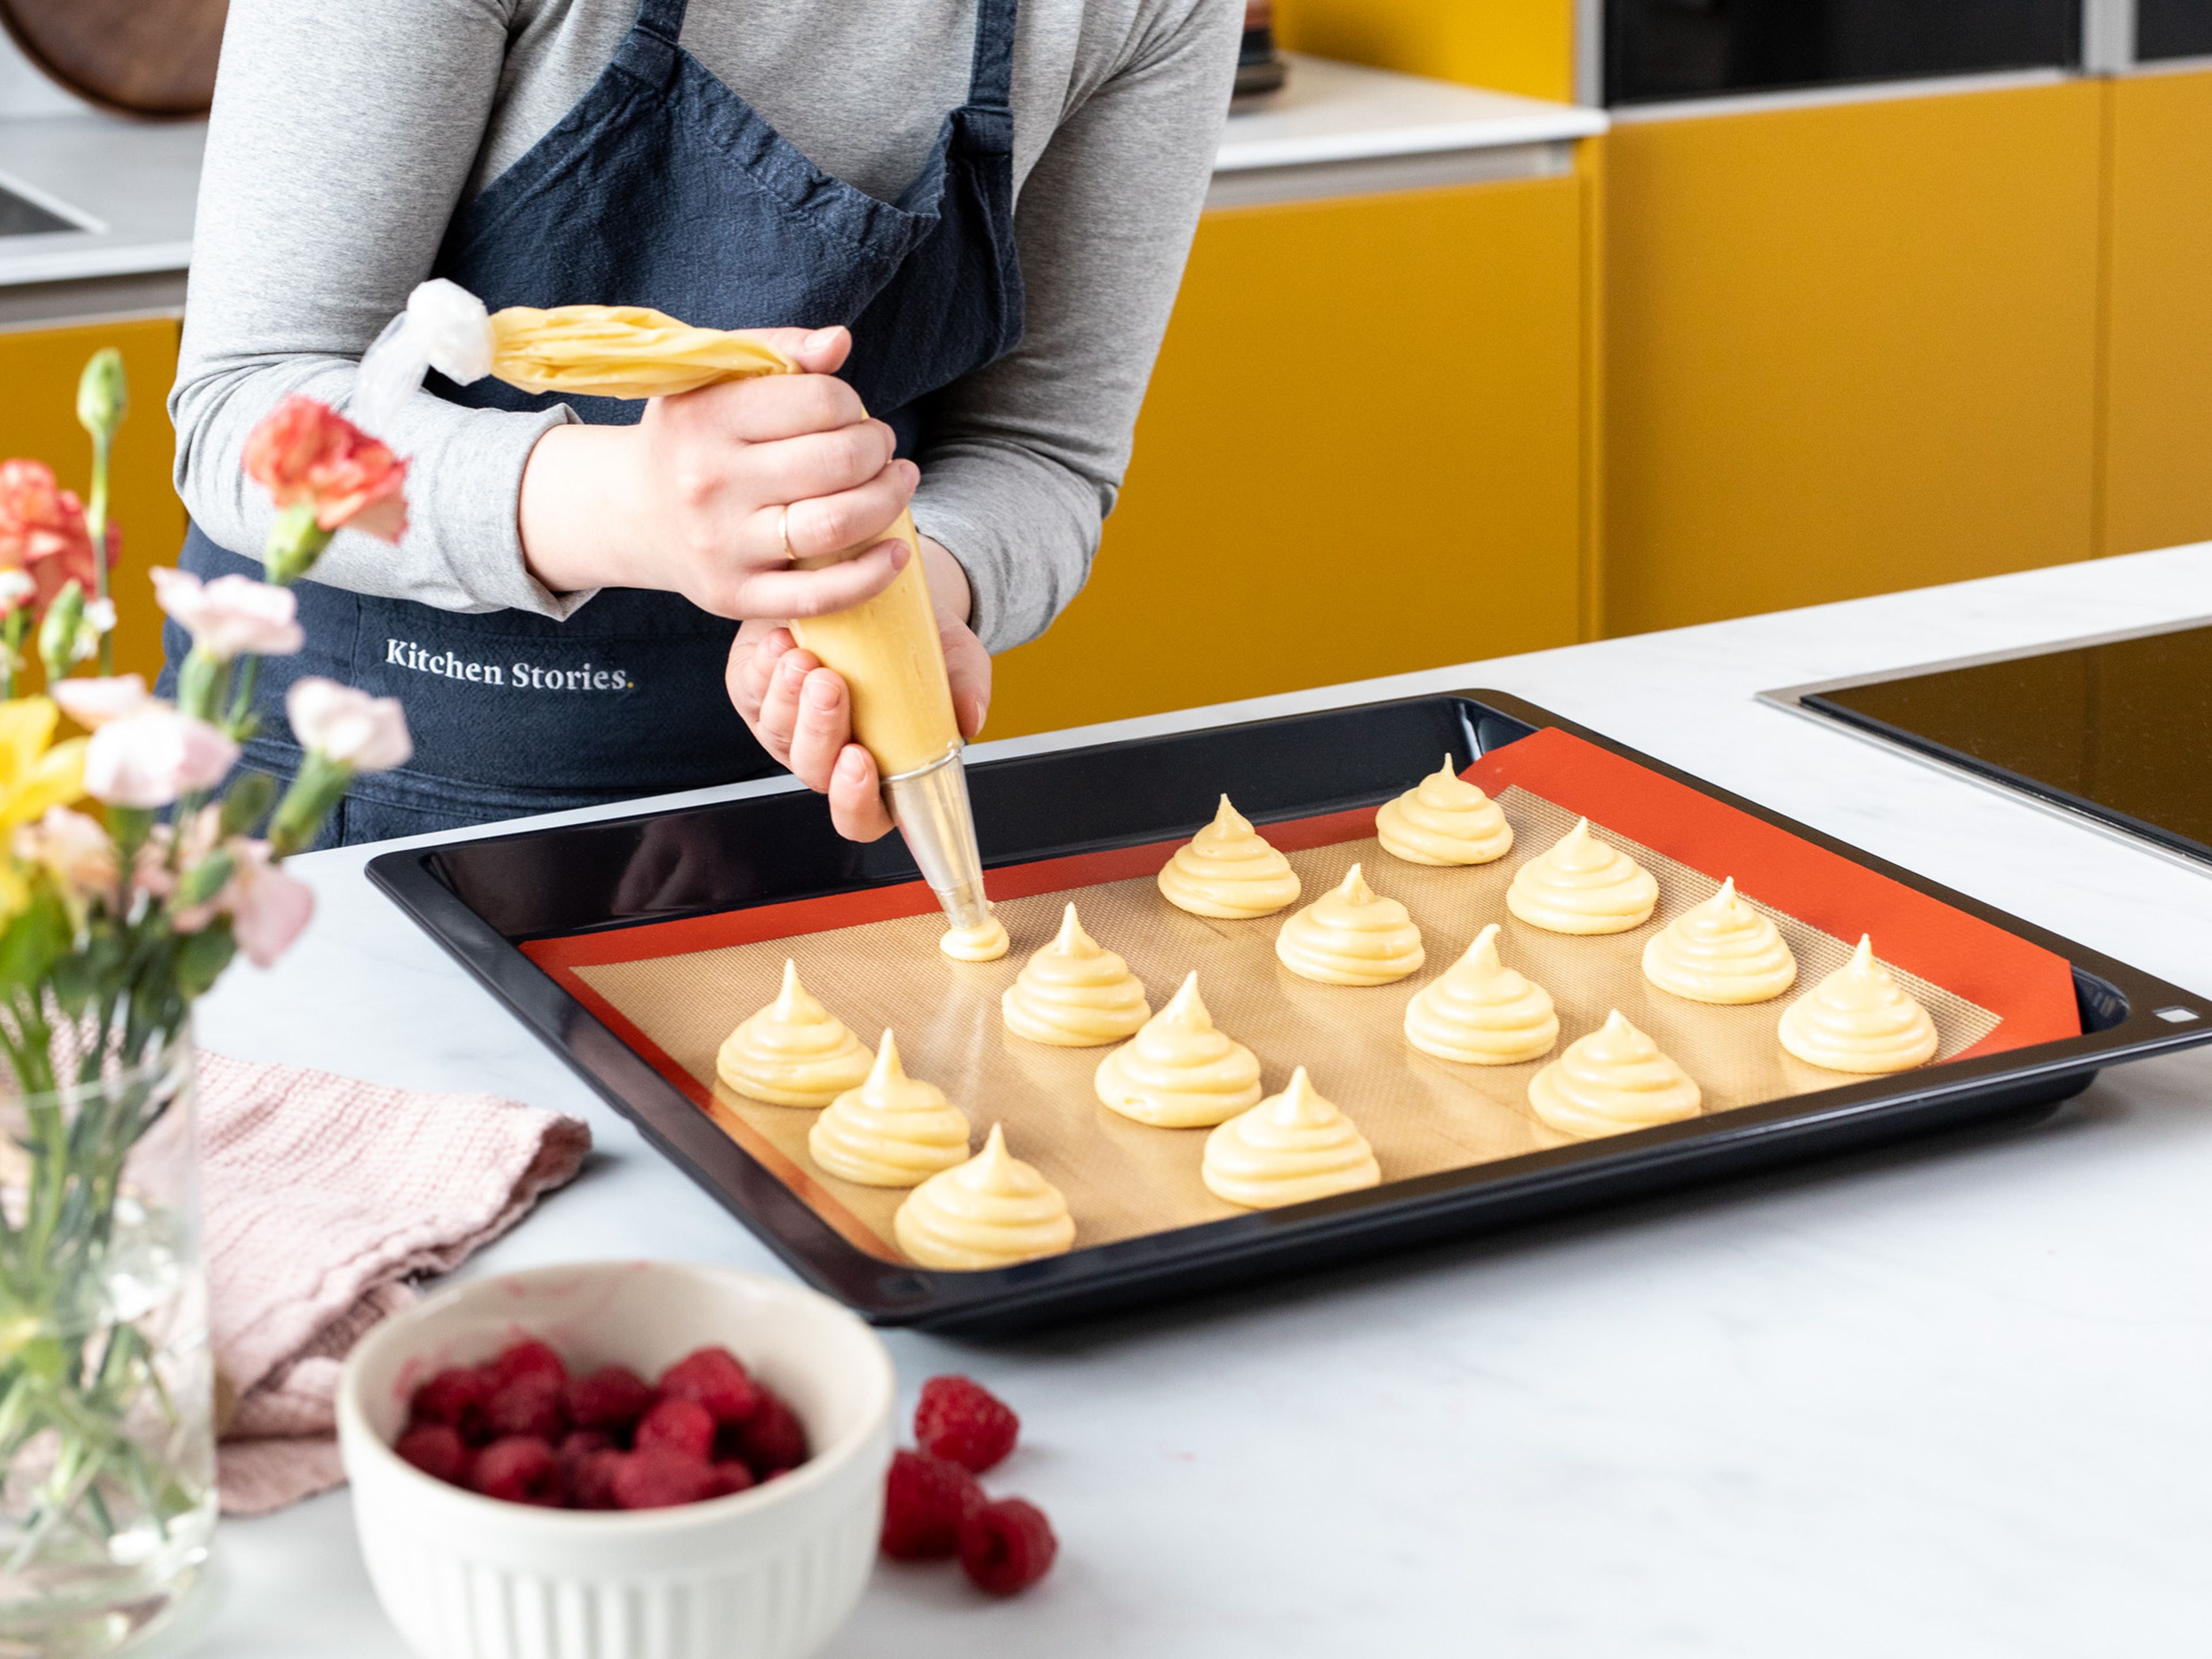 Preheat oven to 180°C/355°F. Fill the choux pastry mixture into a piping bag fitted with a round tip and pipe cream puffs onto a lined baking sheet, making sure to leave enough space around each one.